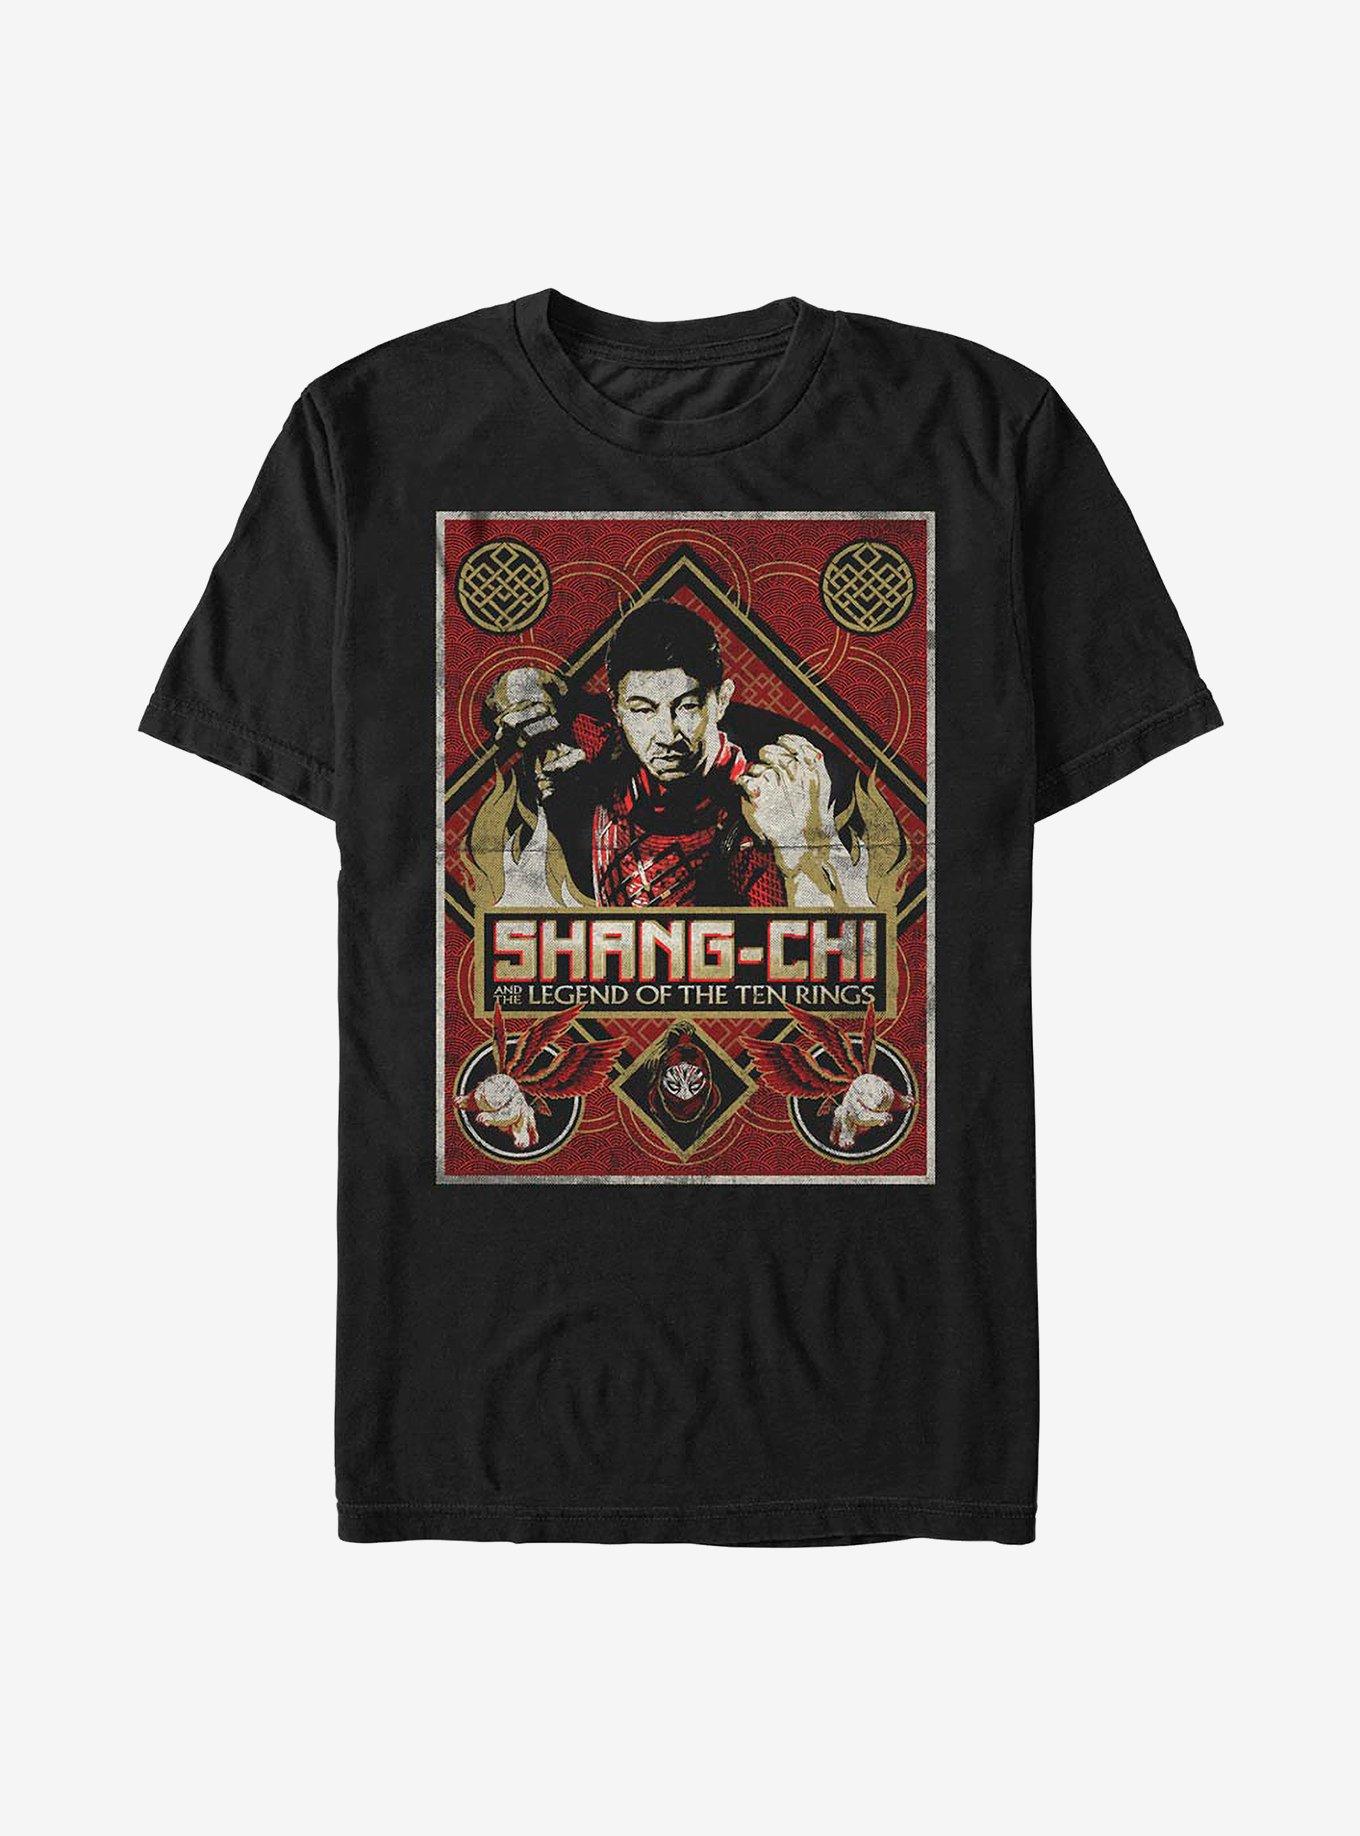 Marvel Shang-Chi And The Legend Of The Ten Rings Defiance T-Shirt, BLACK, hi-res